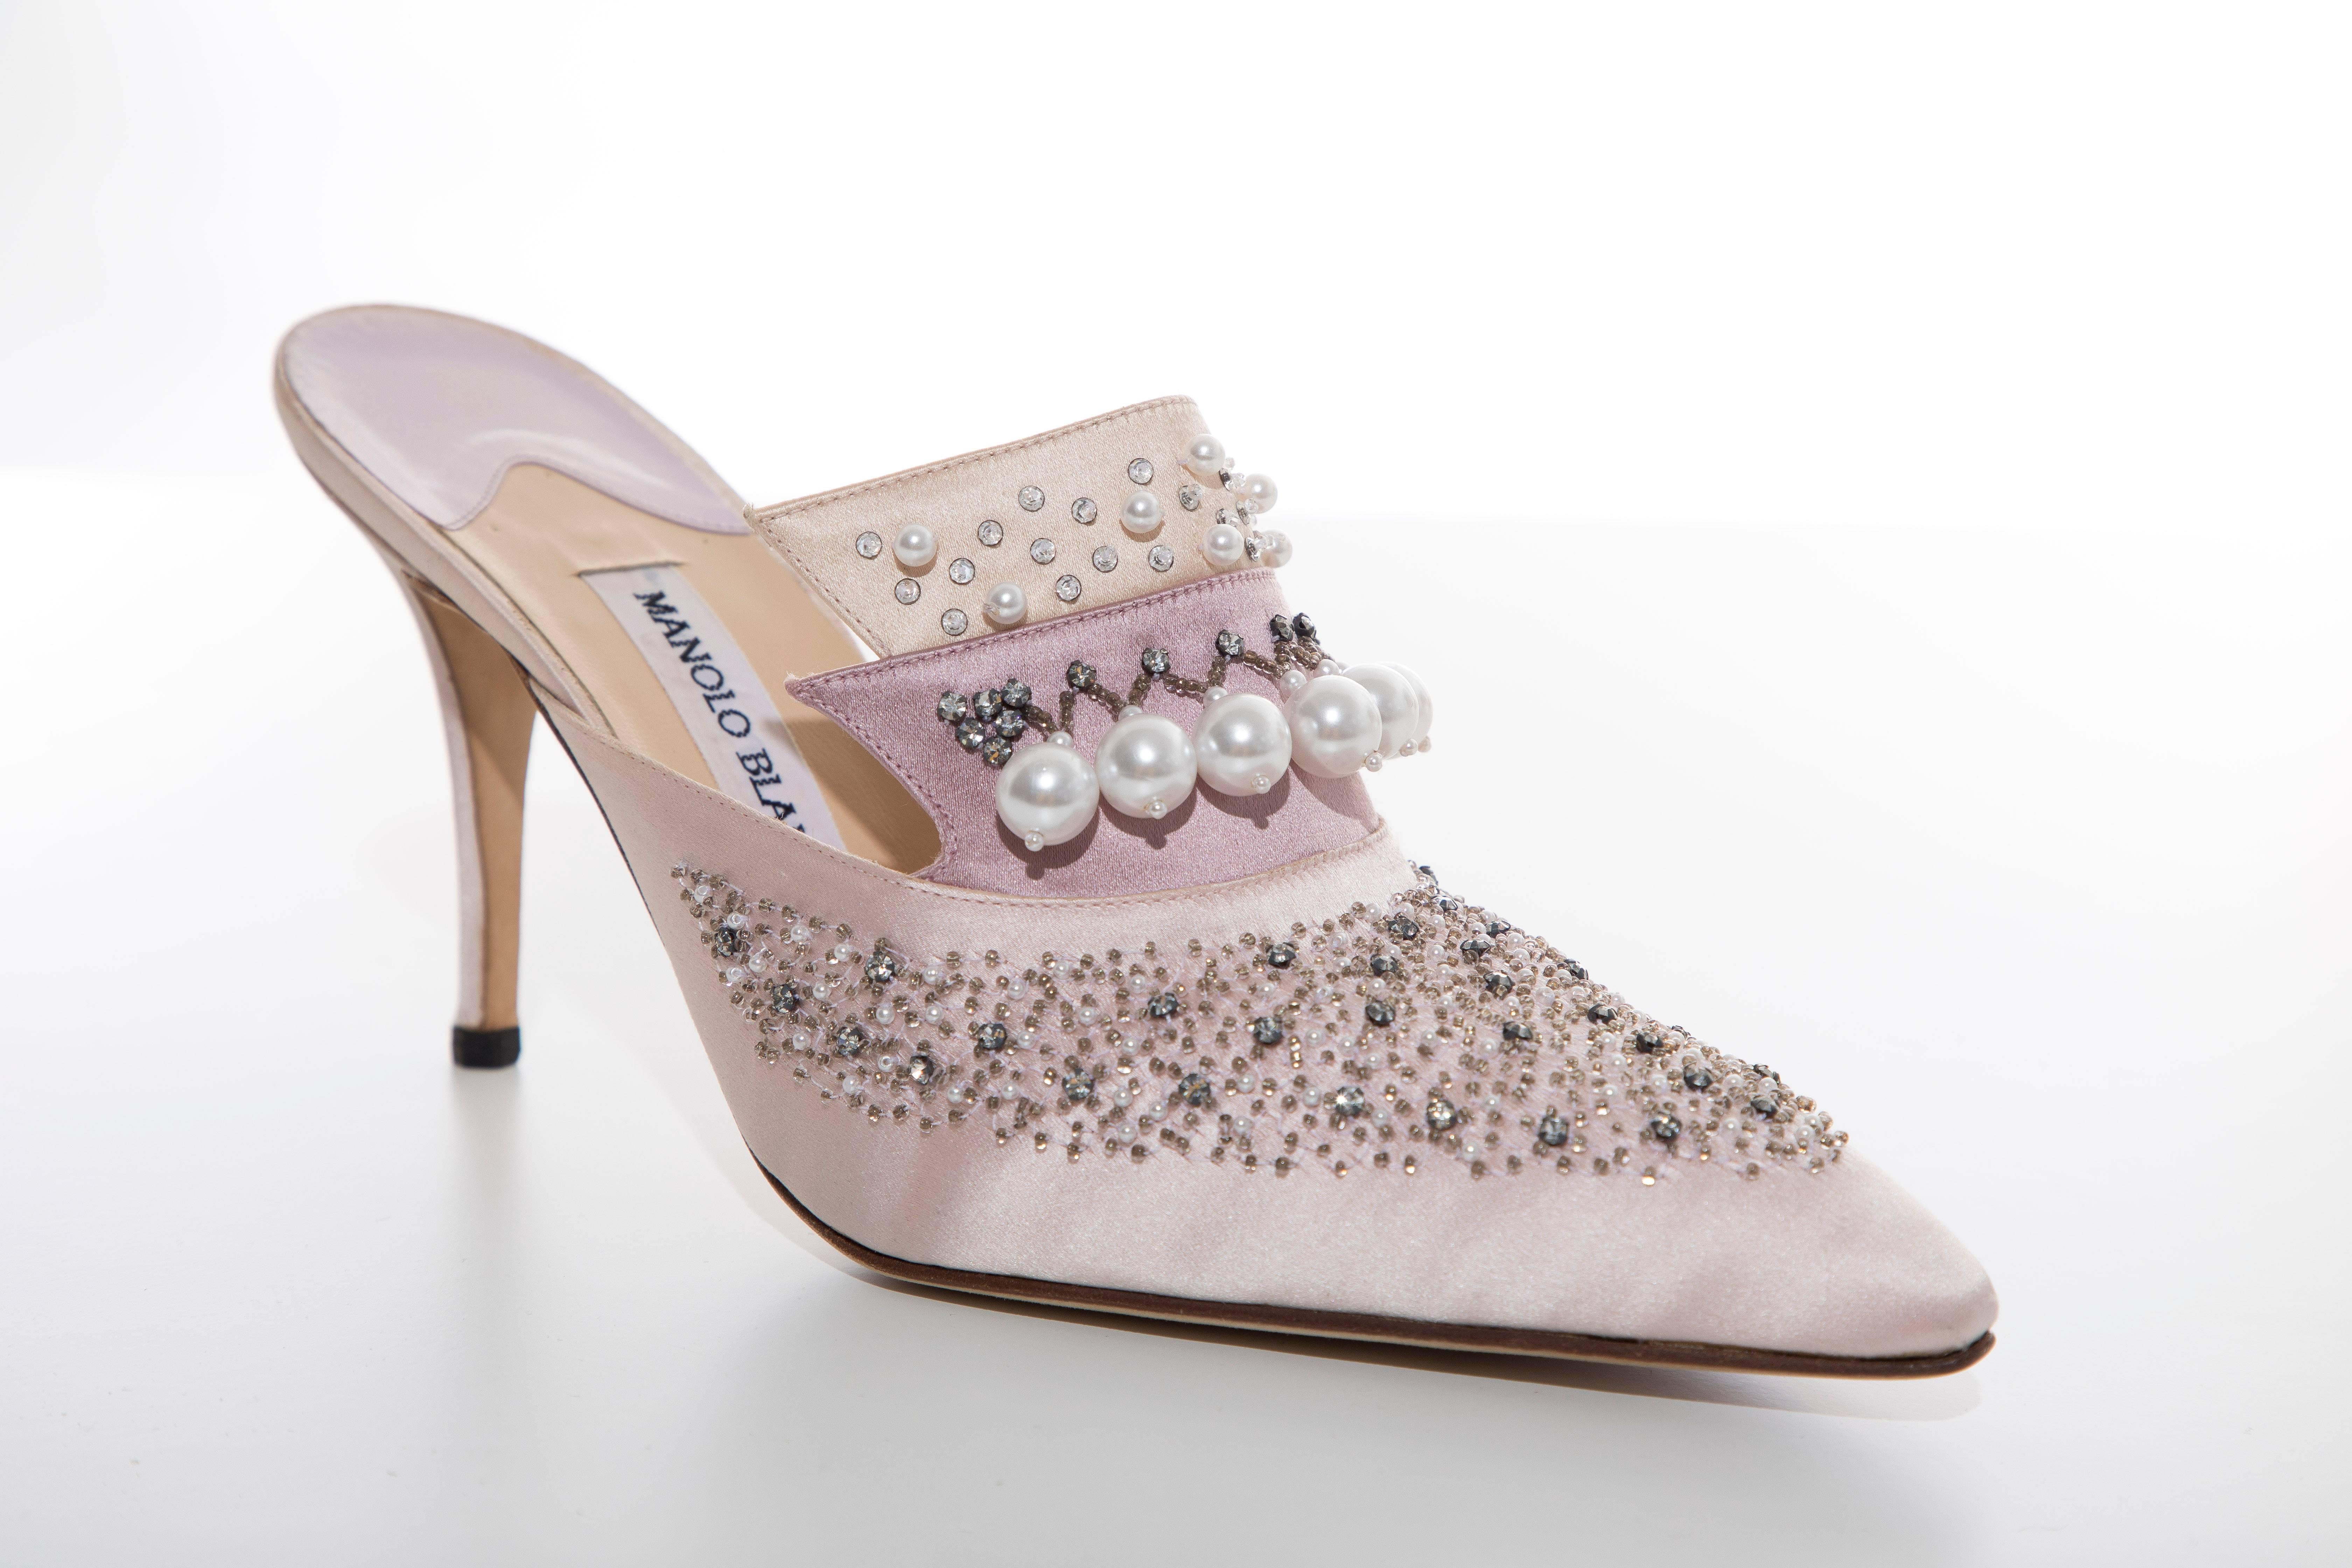 Manolo Blahnik, Circa: 1994  pink silk satin mules with pointed toes, faux pearl embellishments throughout and covered heels. Includes box.

EU. 39.5, US. 9.5

Heels: 3.5